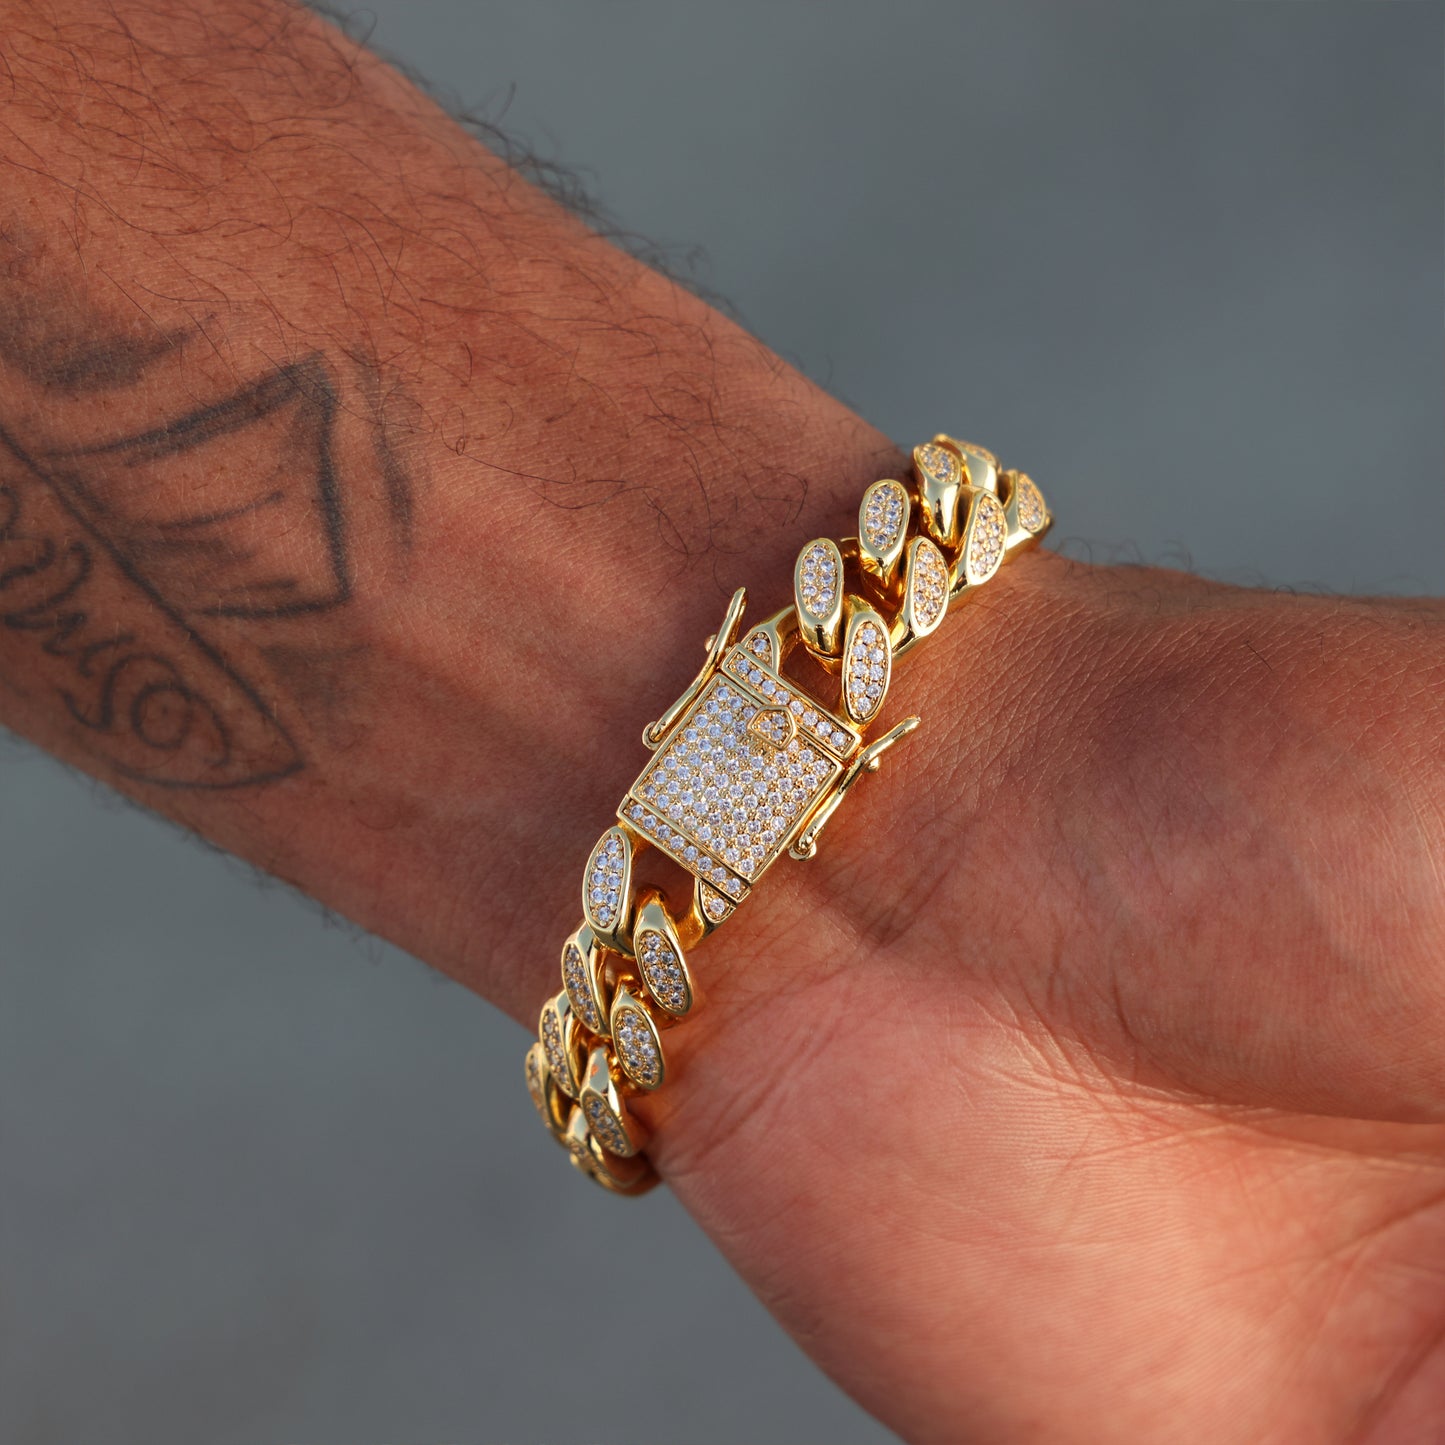 12mm Iced Out Miami Cuban Bracelet - Gold